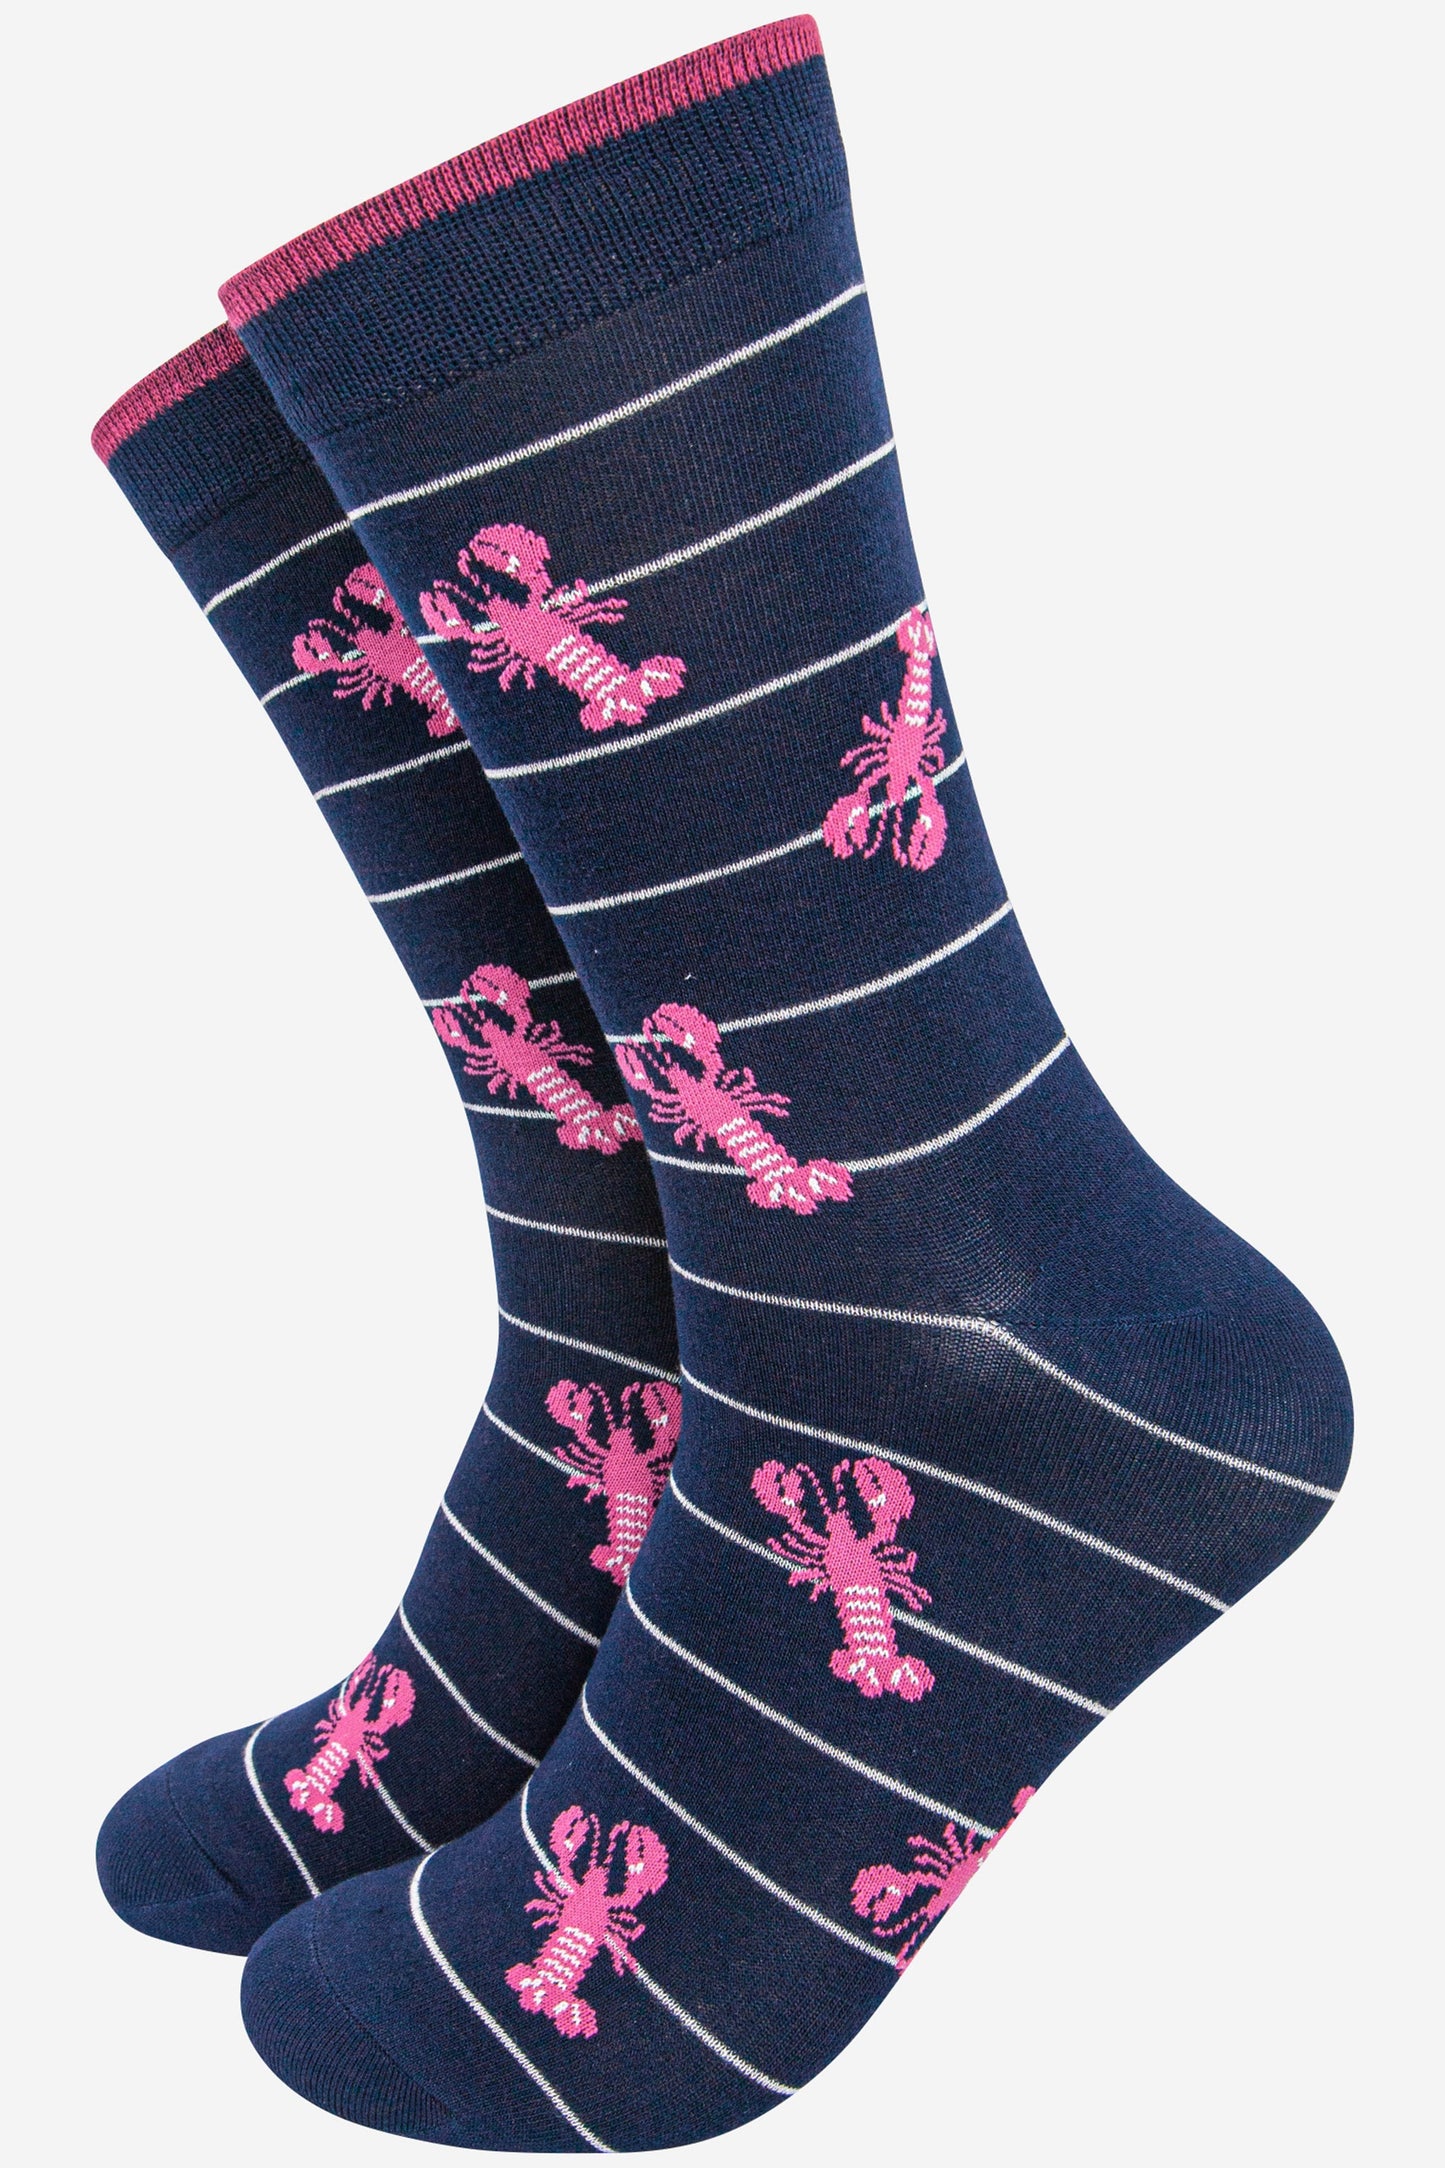 navy blue socks with white horizontal stripes and an all over pink lobster pattern